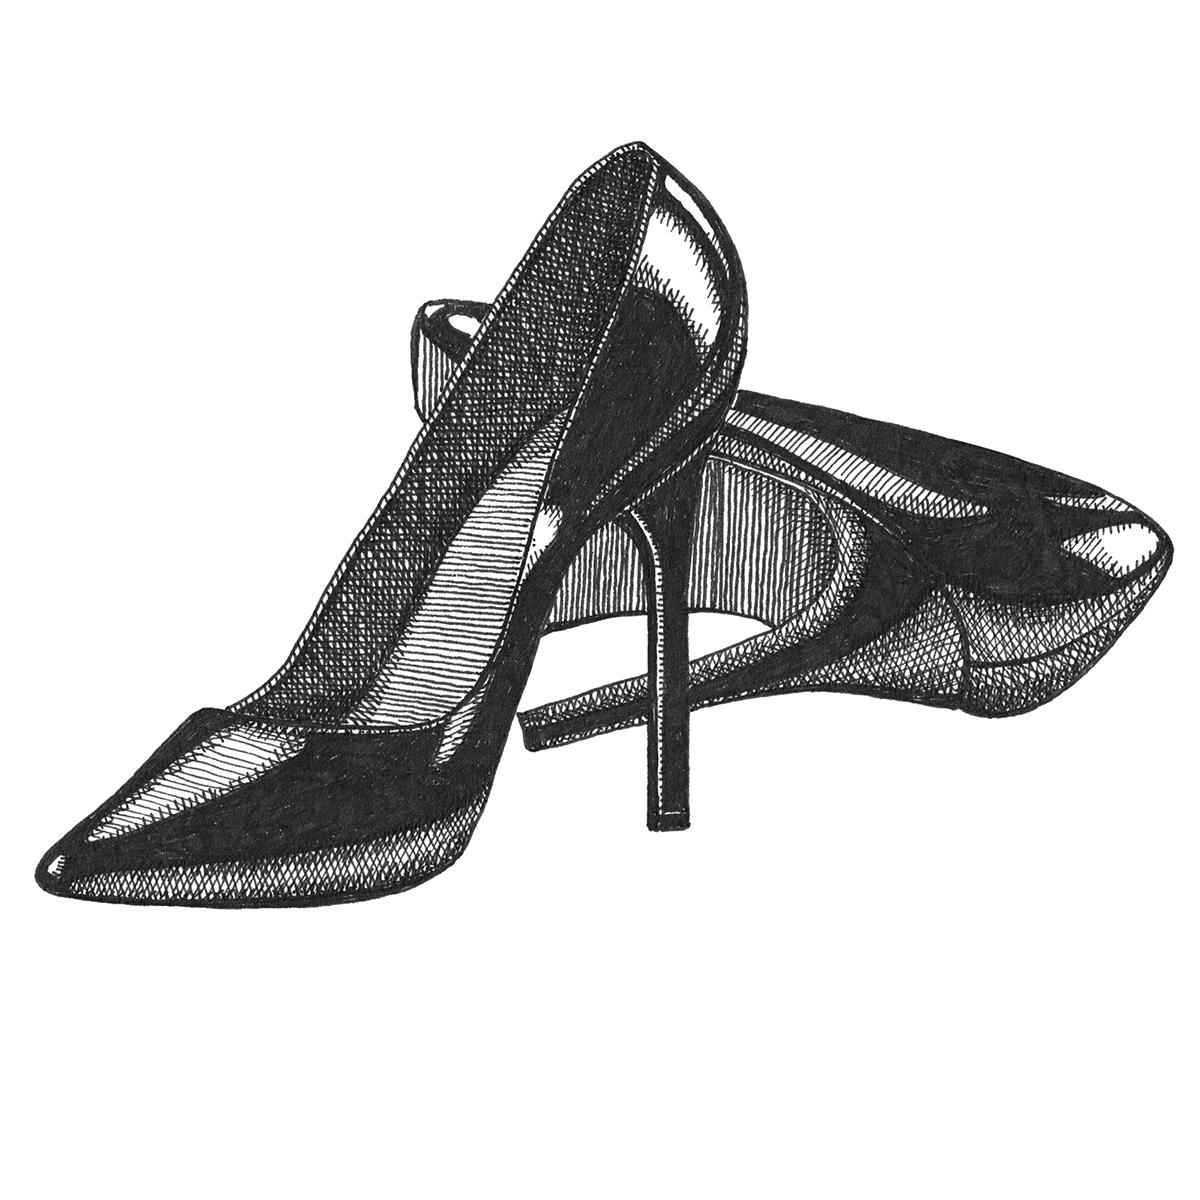 Limited edition print from pen and ink drawing of a pair of stiletto heels